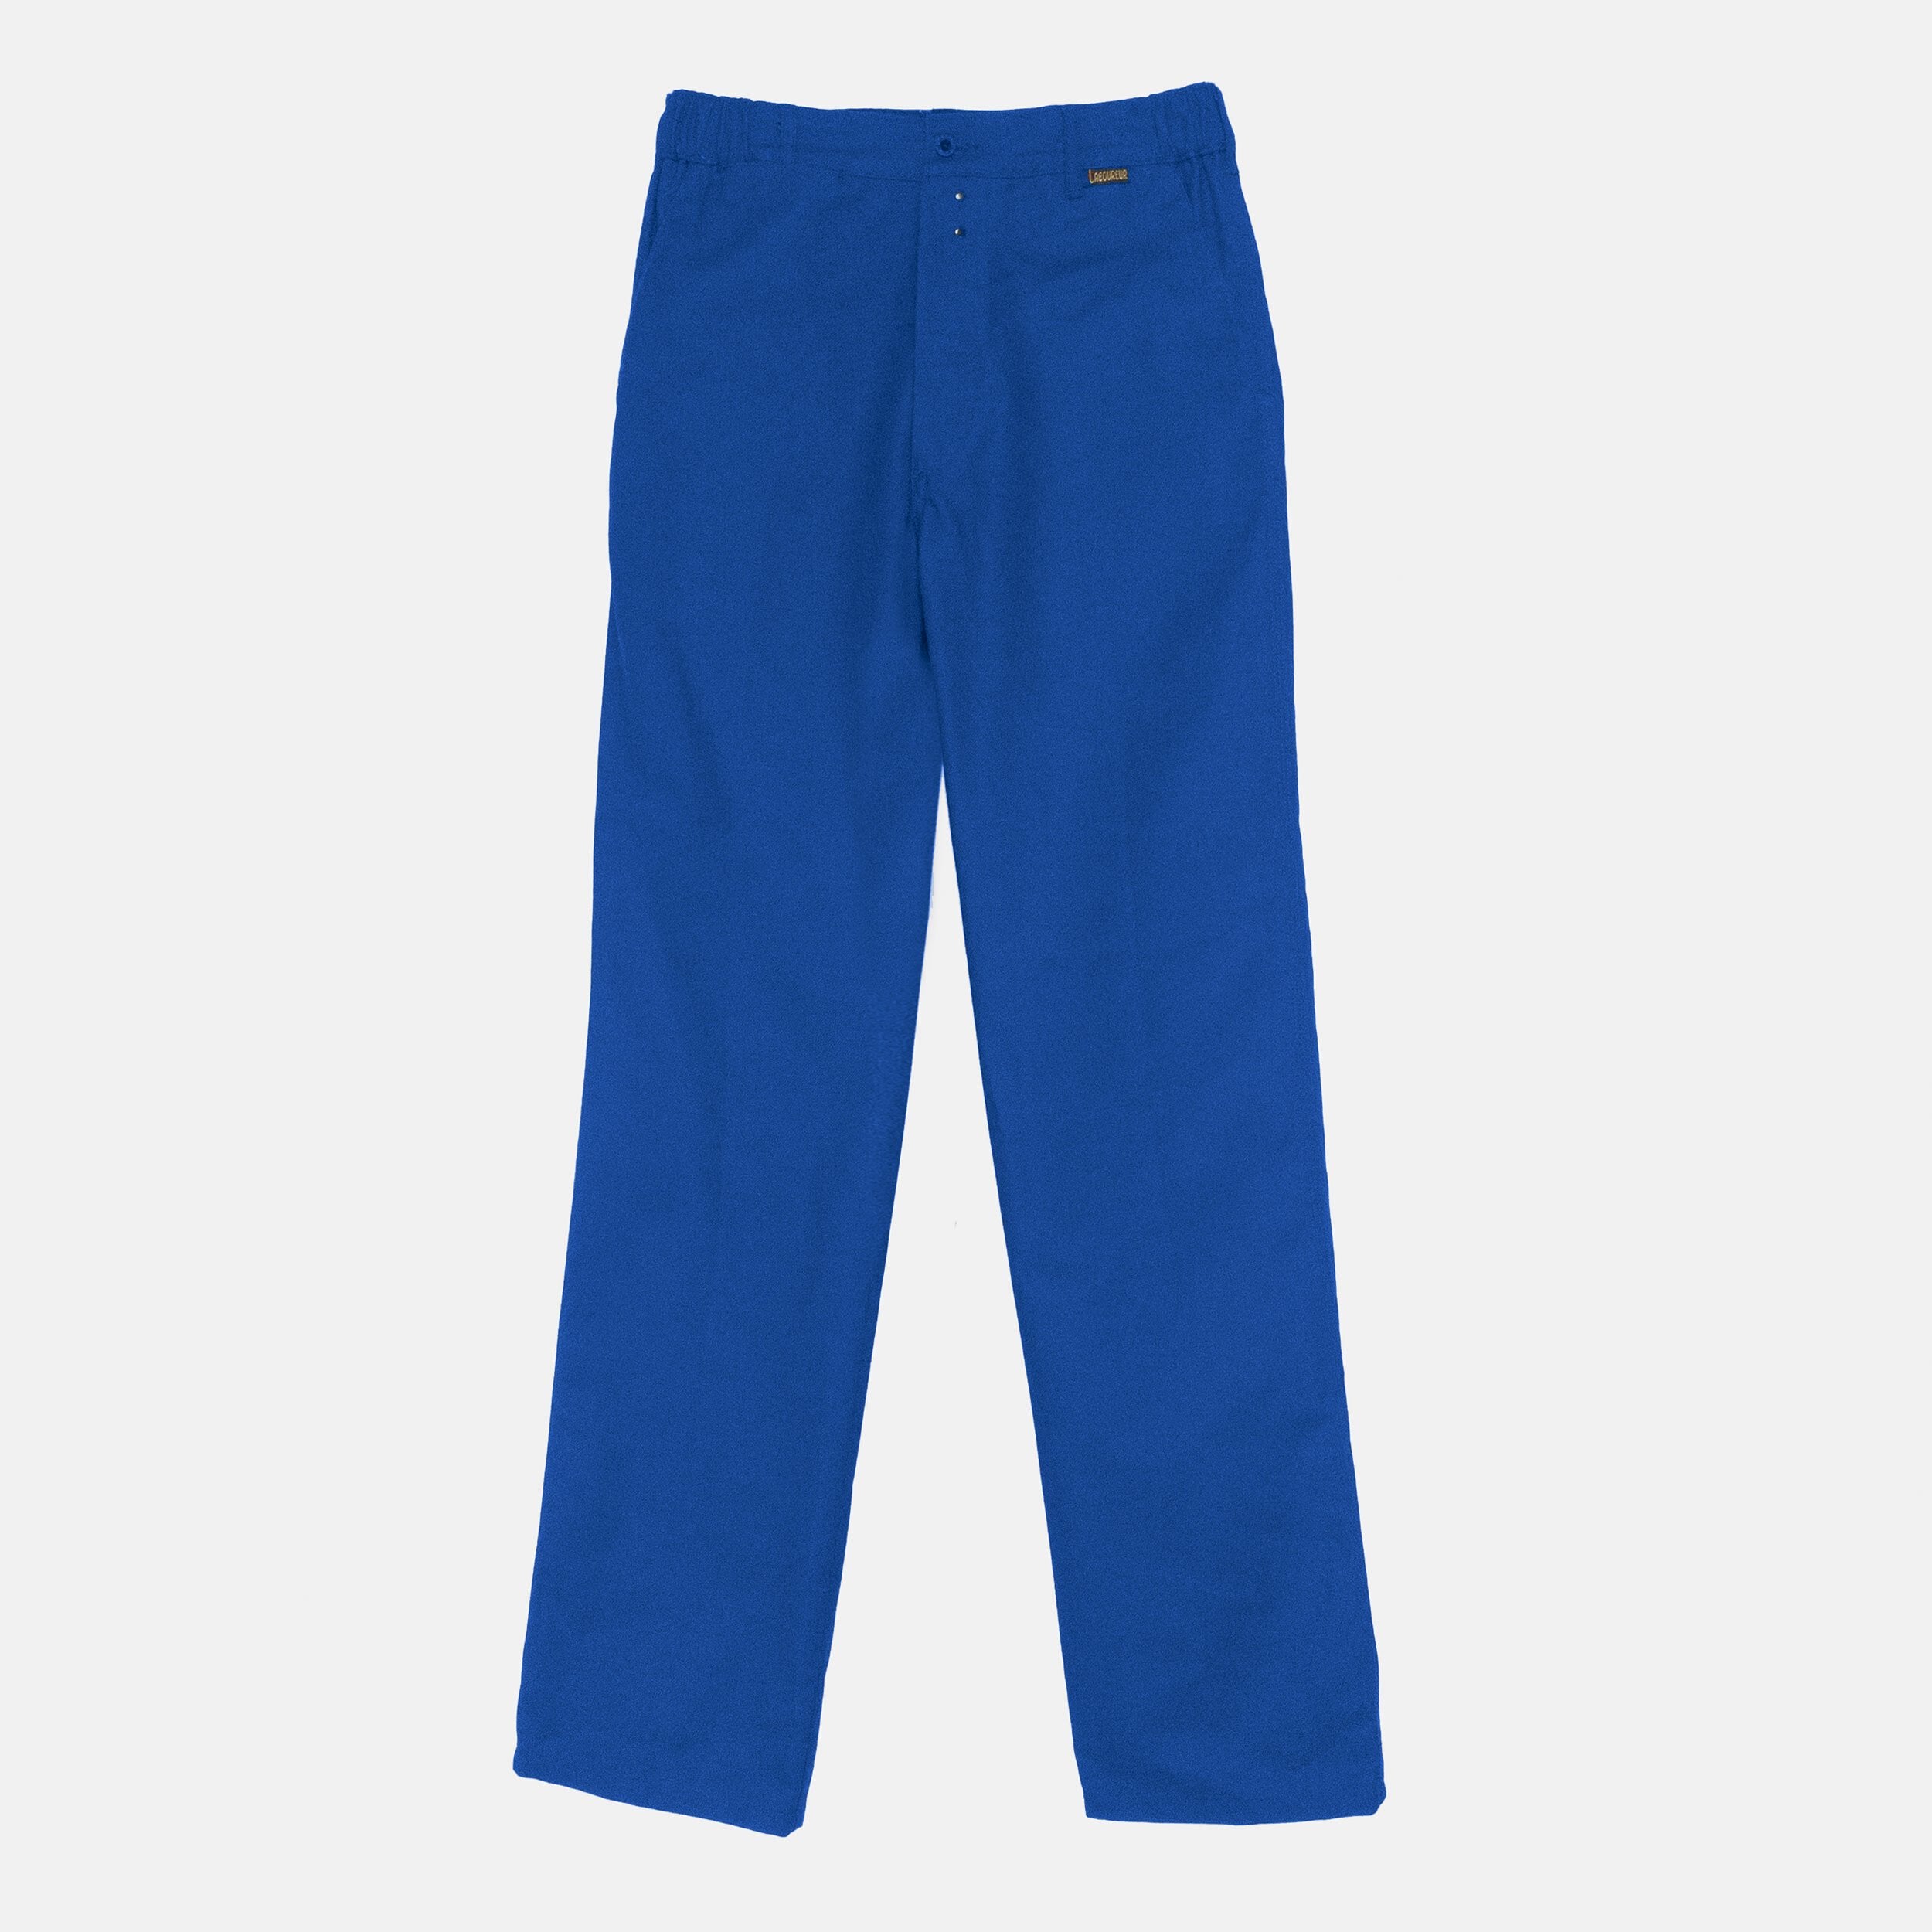 Le Laboureur French Cotton Work Pant in French Blue